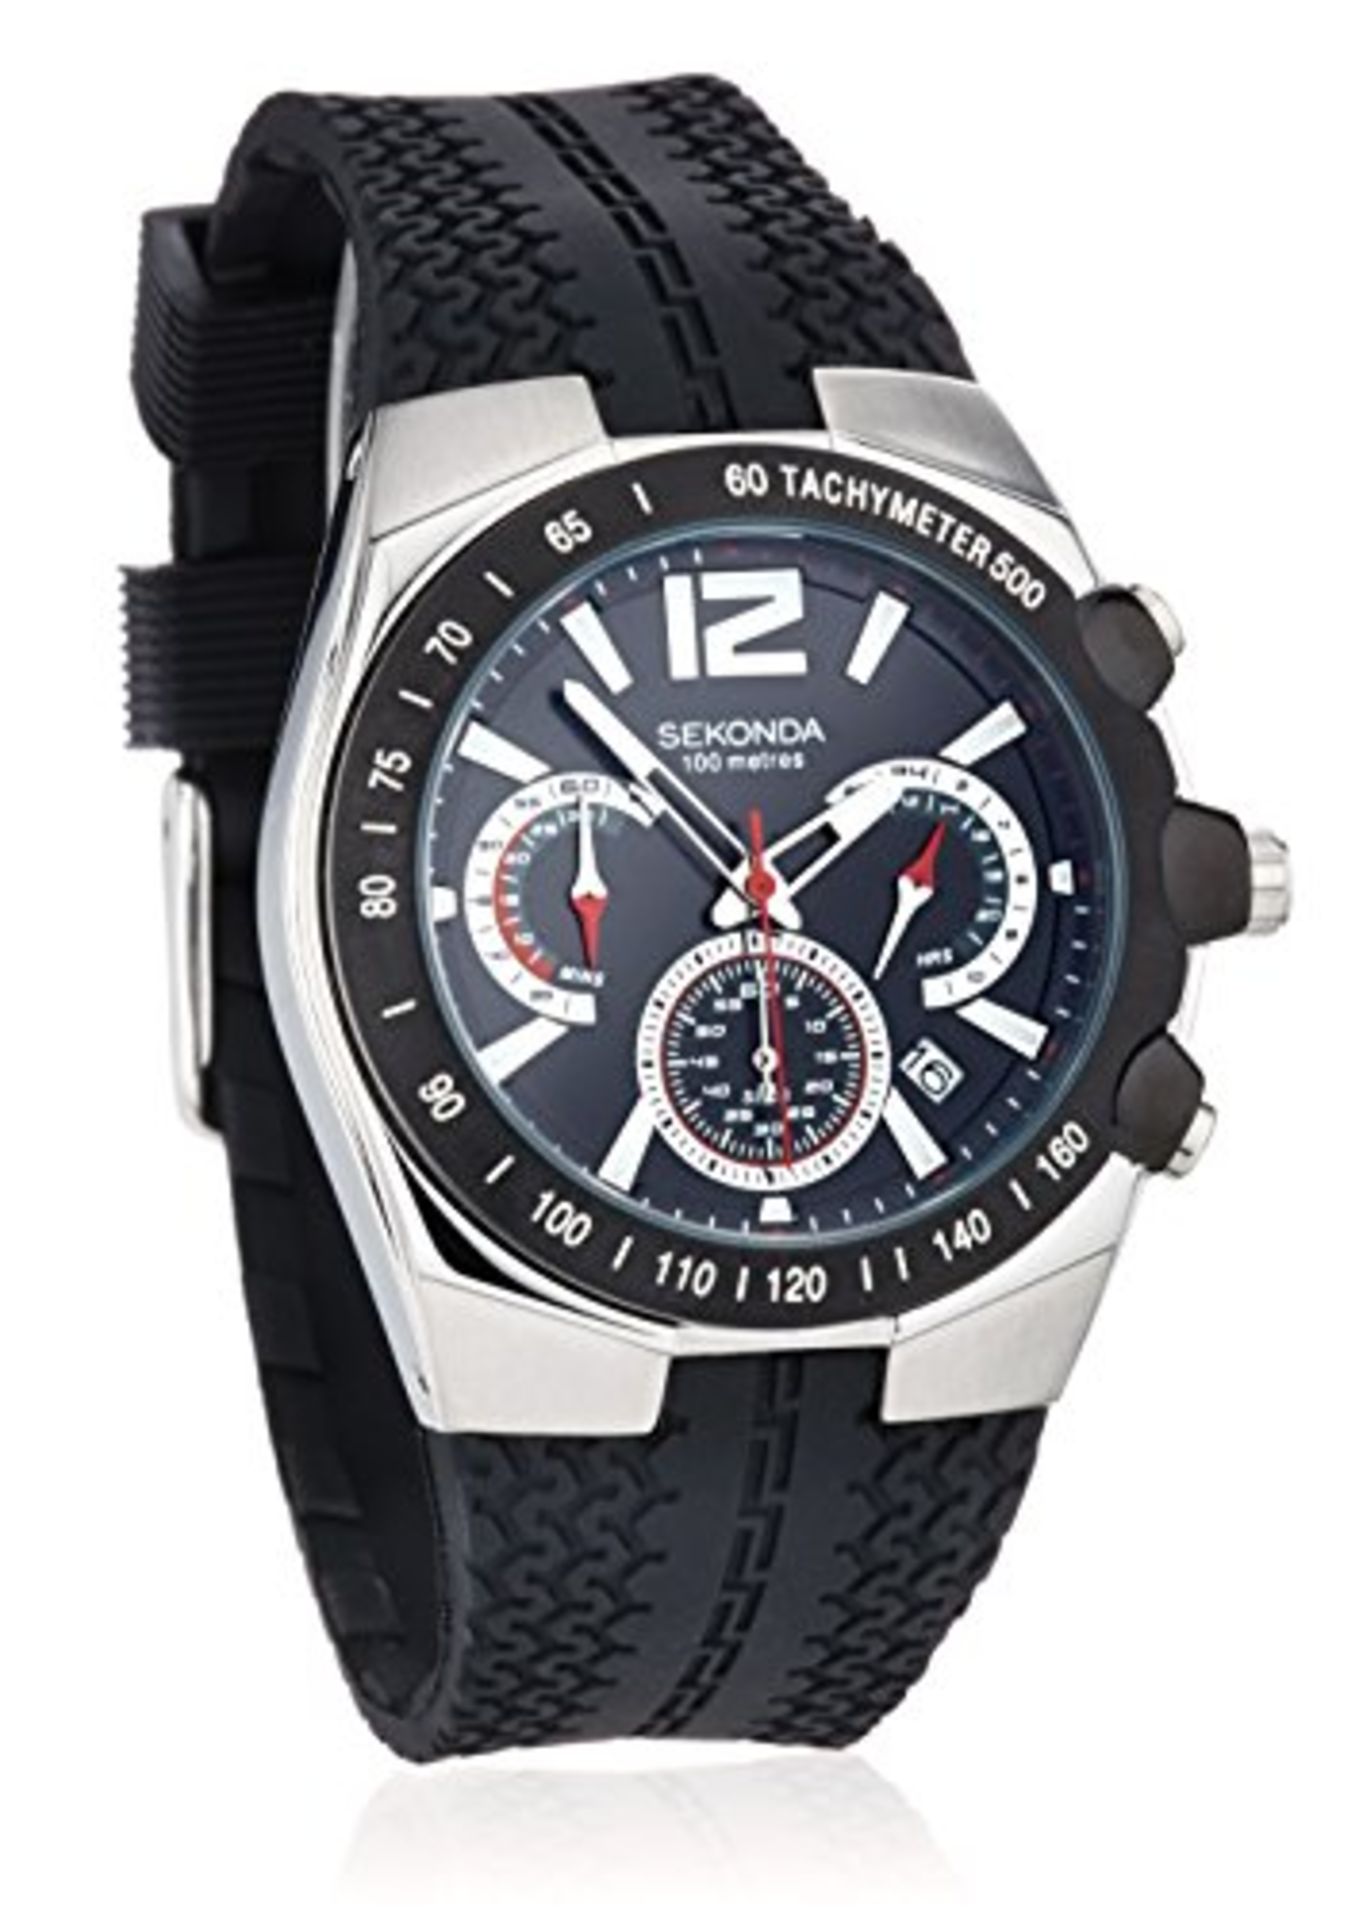 V *TRADE QTY* Brand New Gents Sekonda Chronograph Tachymeter 500 with Rubber Strap - ISP £89.99 (The